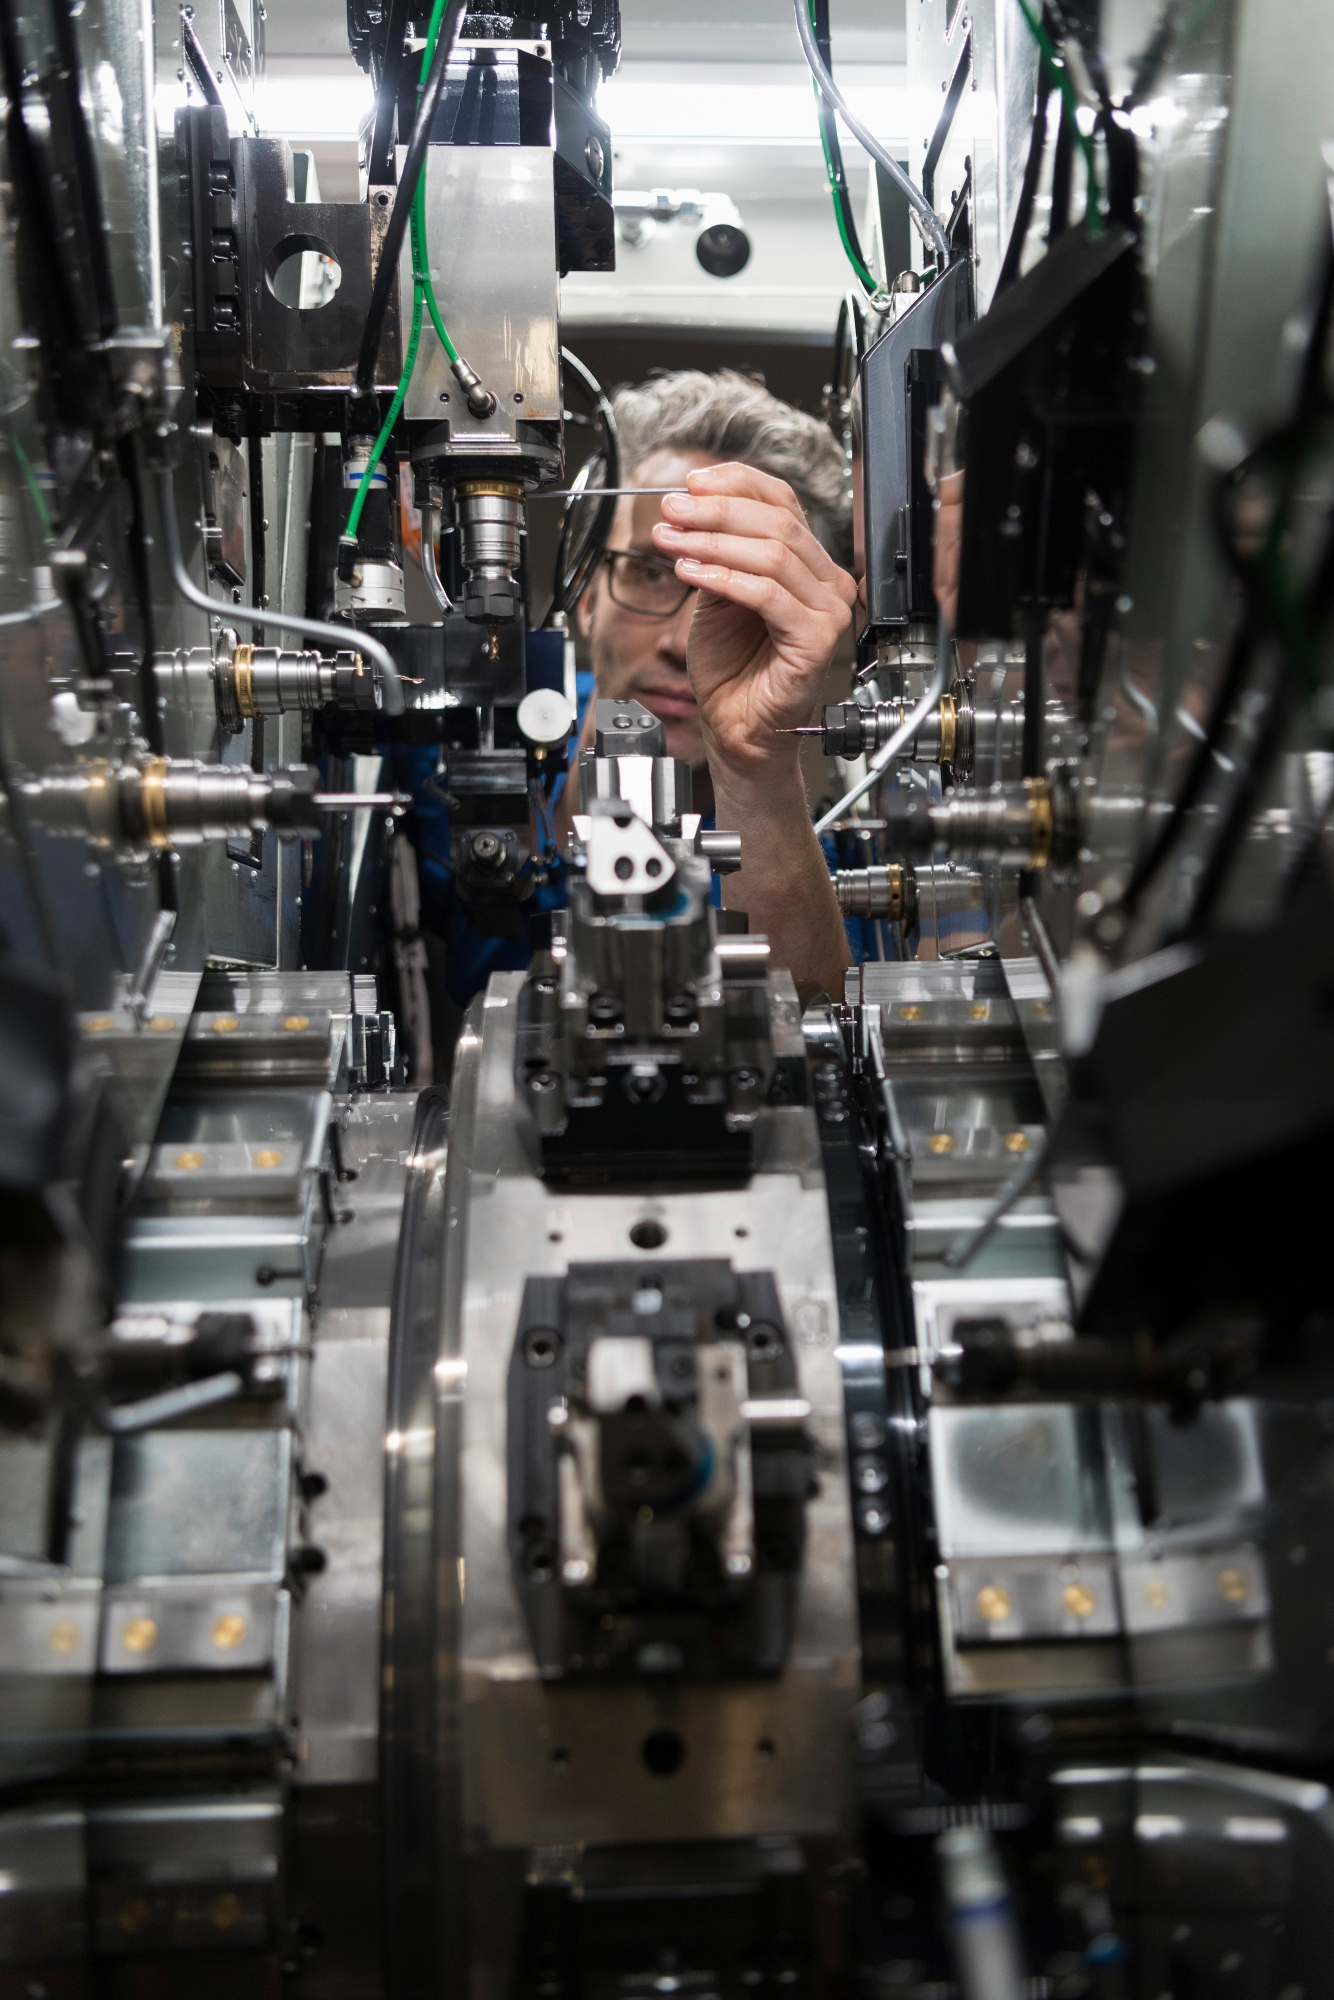 An employee works on a machine at the Mikron Machining production site of the Mikron Group in Agno, Canton of Ticino, Switzerland, on January 24, 2019. The engineering company Mikron Group develops, produces and markets automation solutions as Mikron Automation in Boudry, Canton of Neuchatel, as well as machining systems as Mikron Machining and cutting tools, as Mikron Tool, in Agno, besides various production sites abroad. (KEYSTONE/Christian Beutler) SCHWEIZ AGNO MIKRON